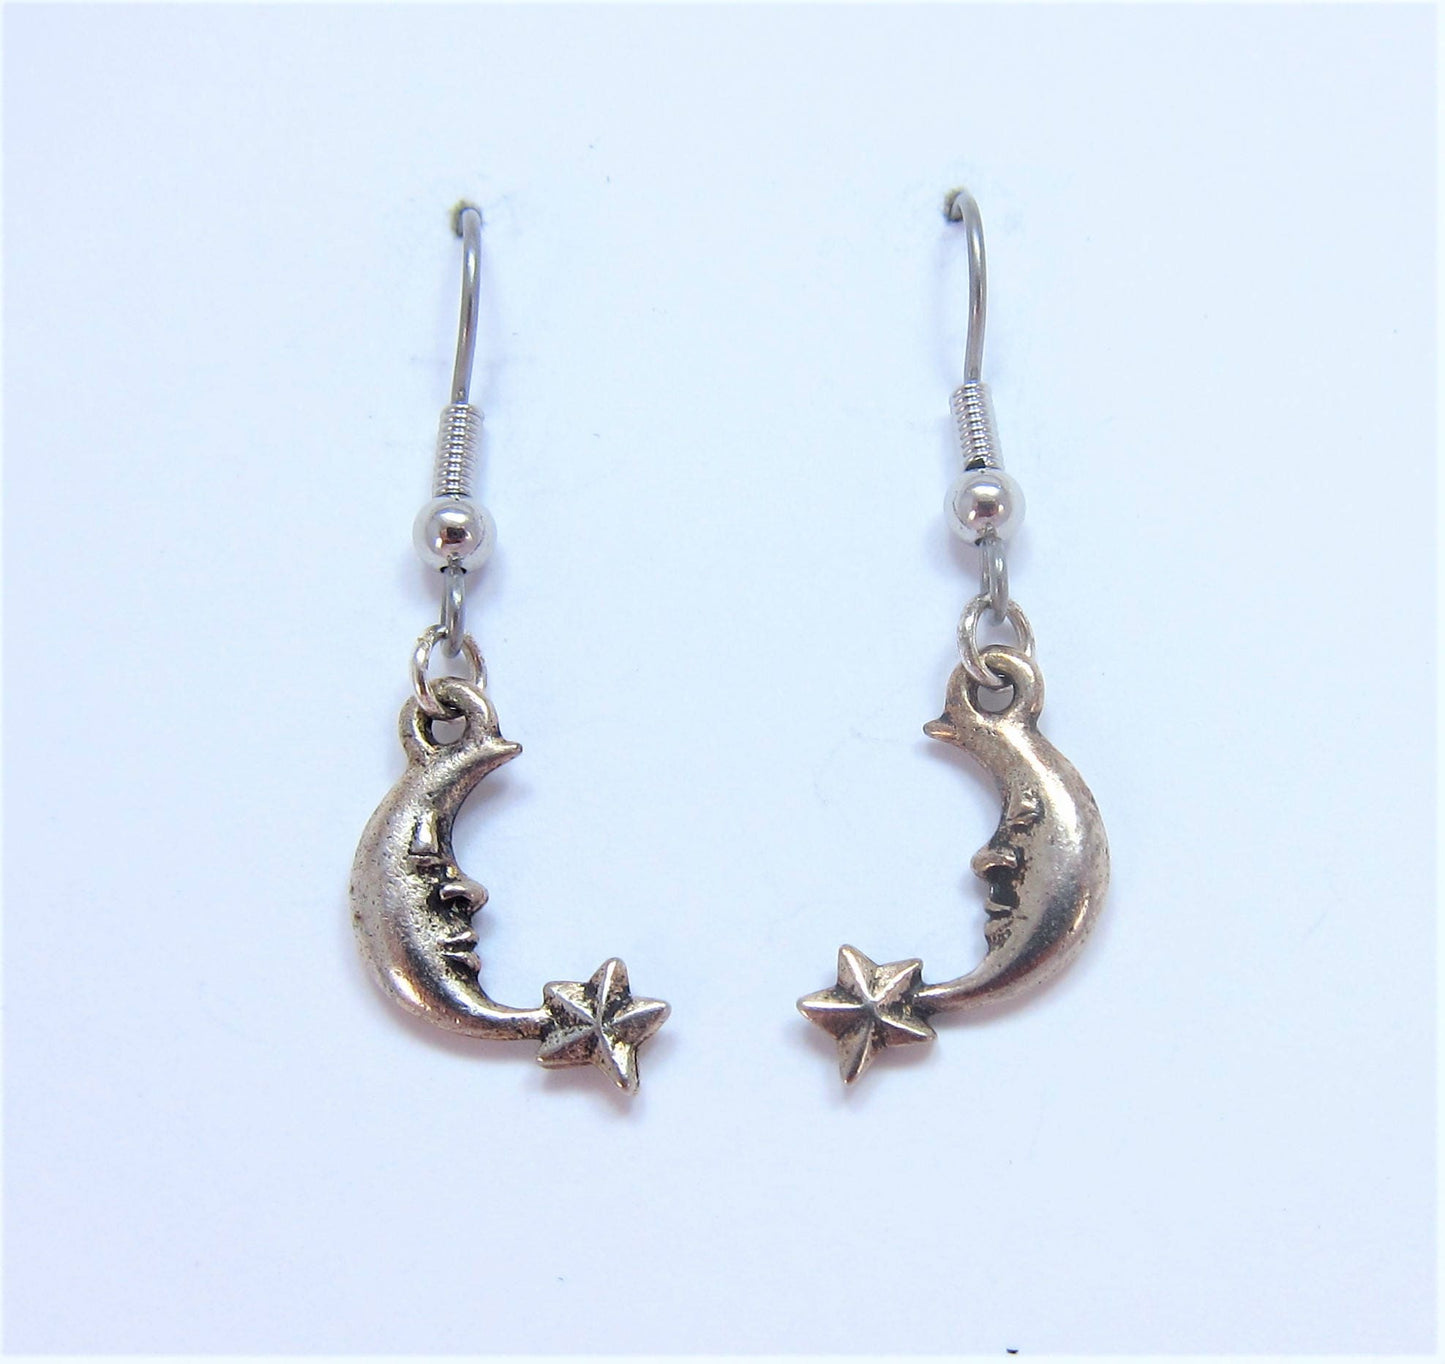 Charmed! Crescent moon earrings silver plate antique finish on hypoallergenic surgical steel hooks